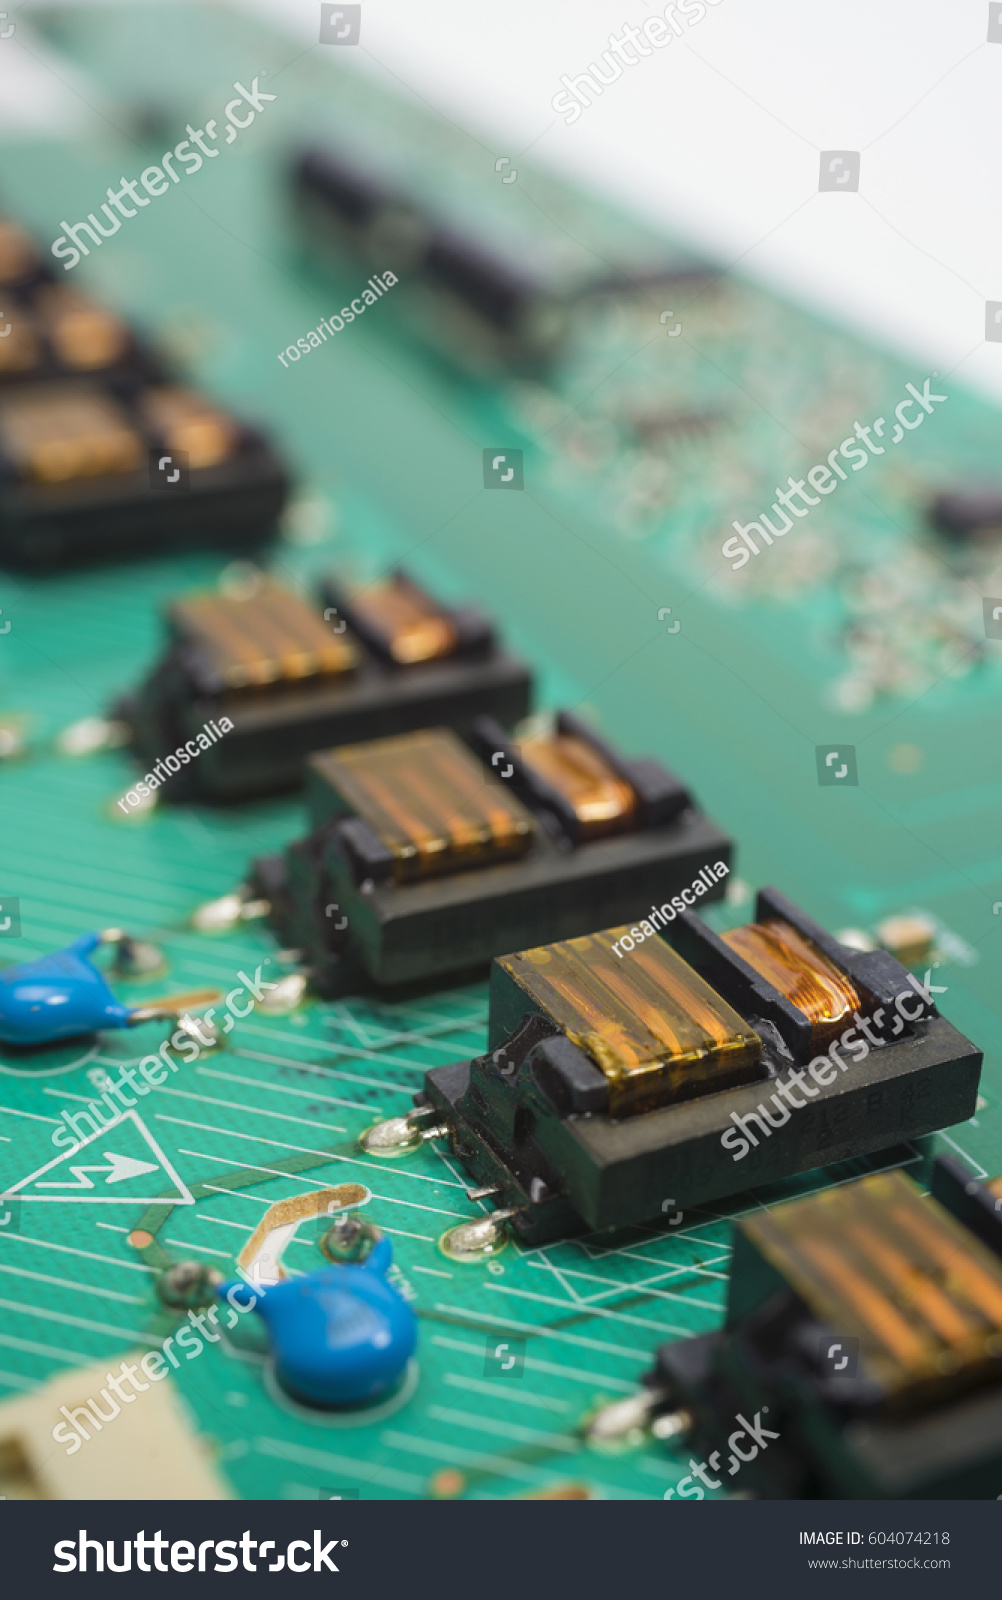 Edit Images Free Online - Electronic circuit ...